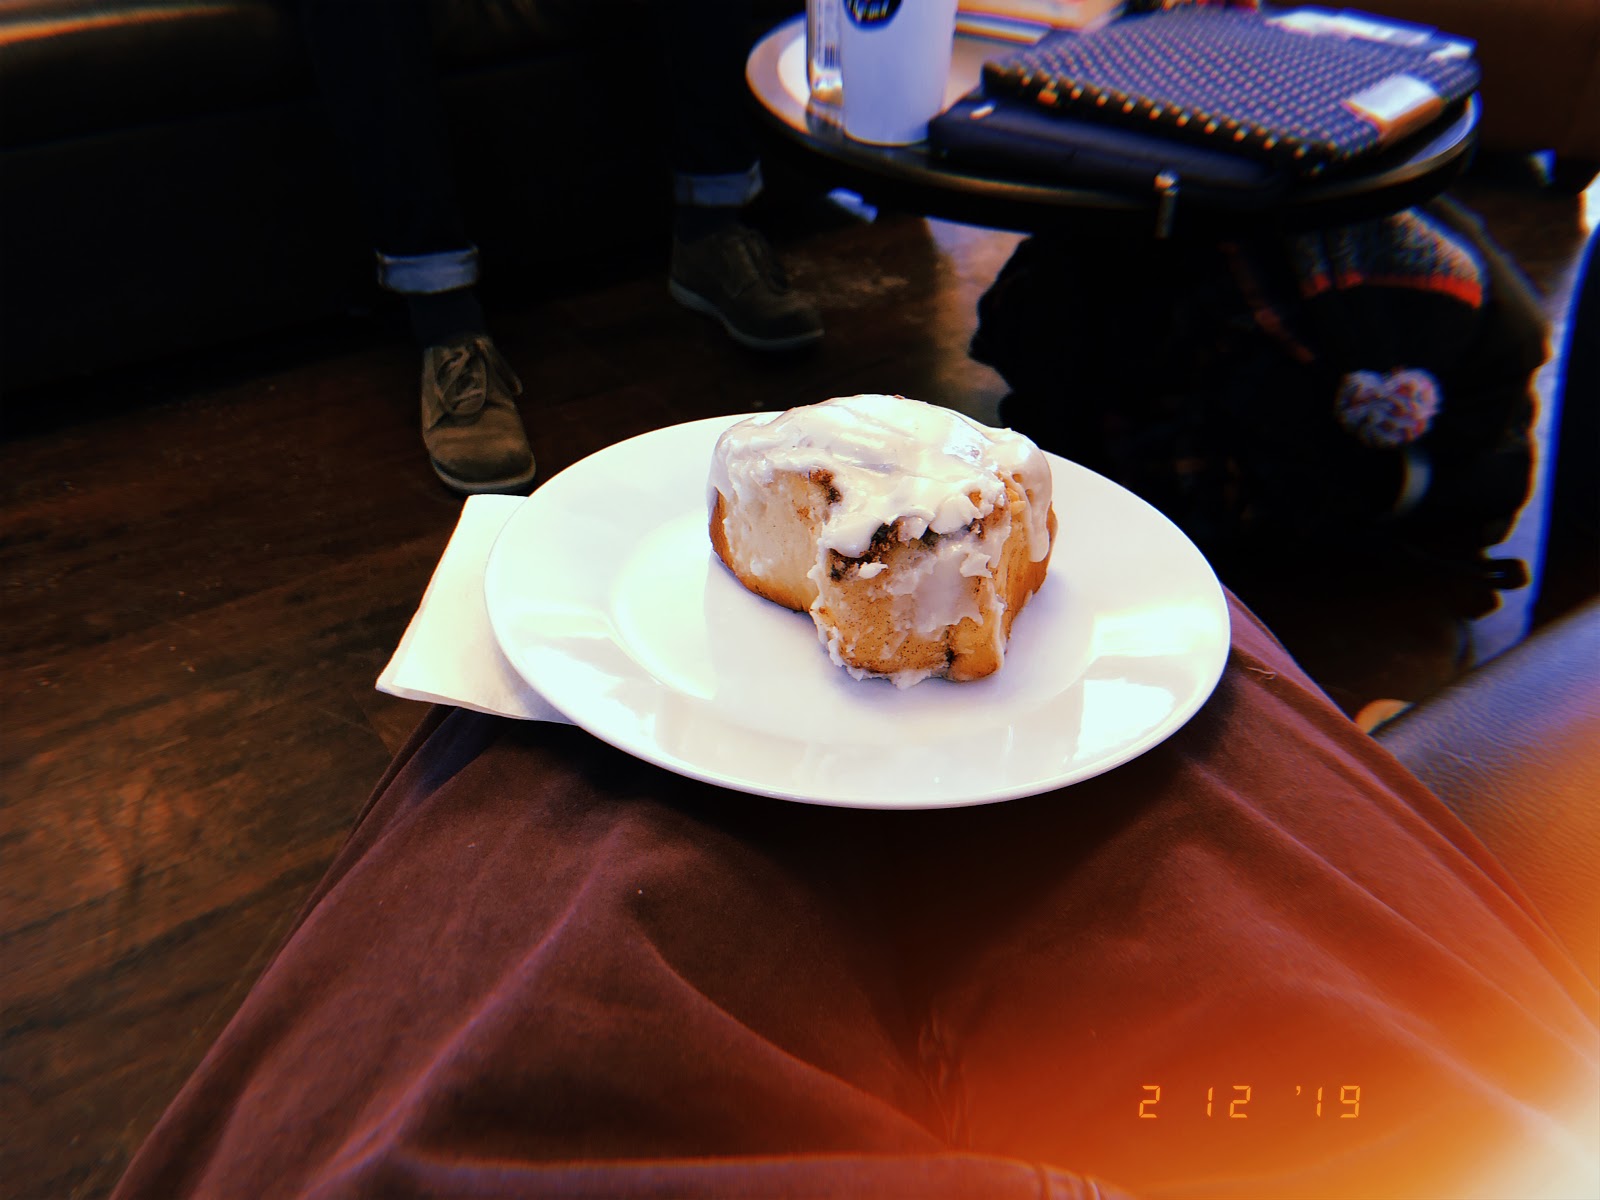 A glazed cinnamon bun from the Walk-In Coffee Closet rests on top of a white plate